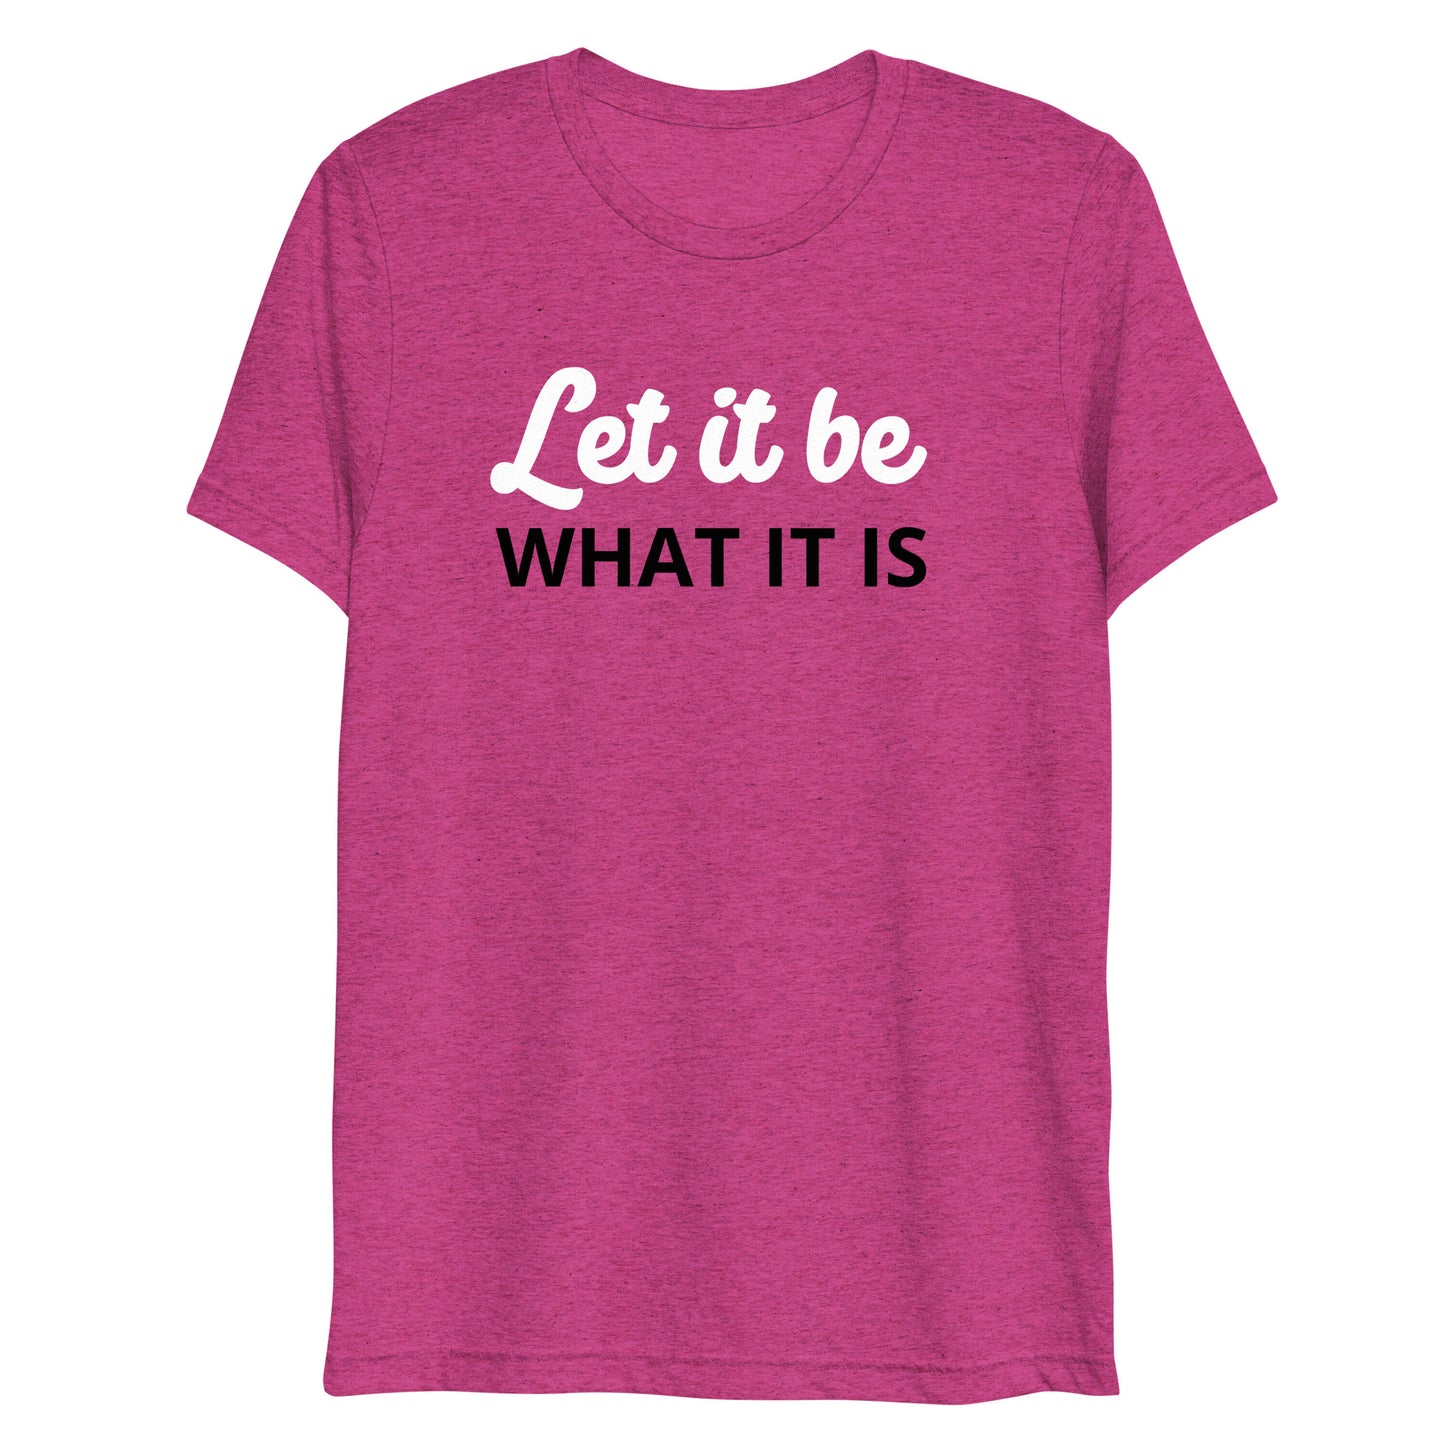 Motivate Merch Let it Be T-Shirt for the Artist who seeks the Spotlight - Tri Blend Pink